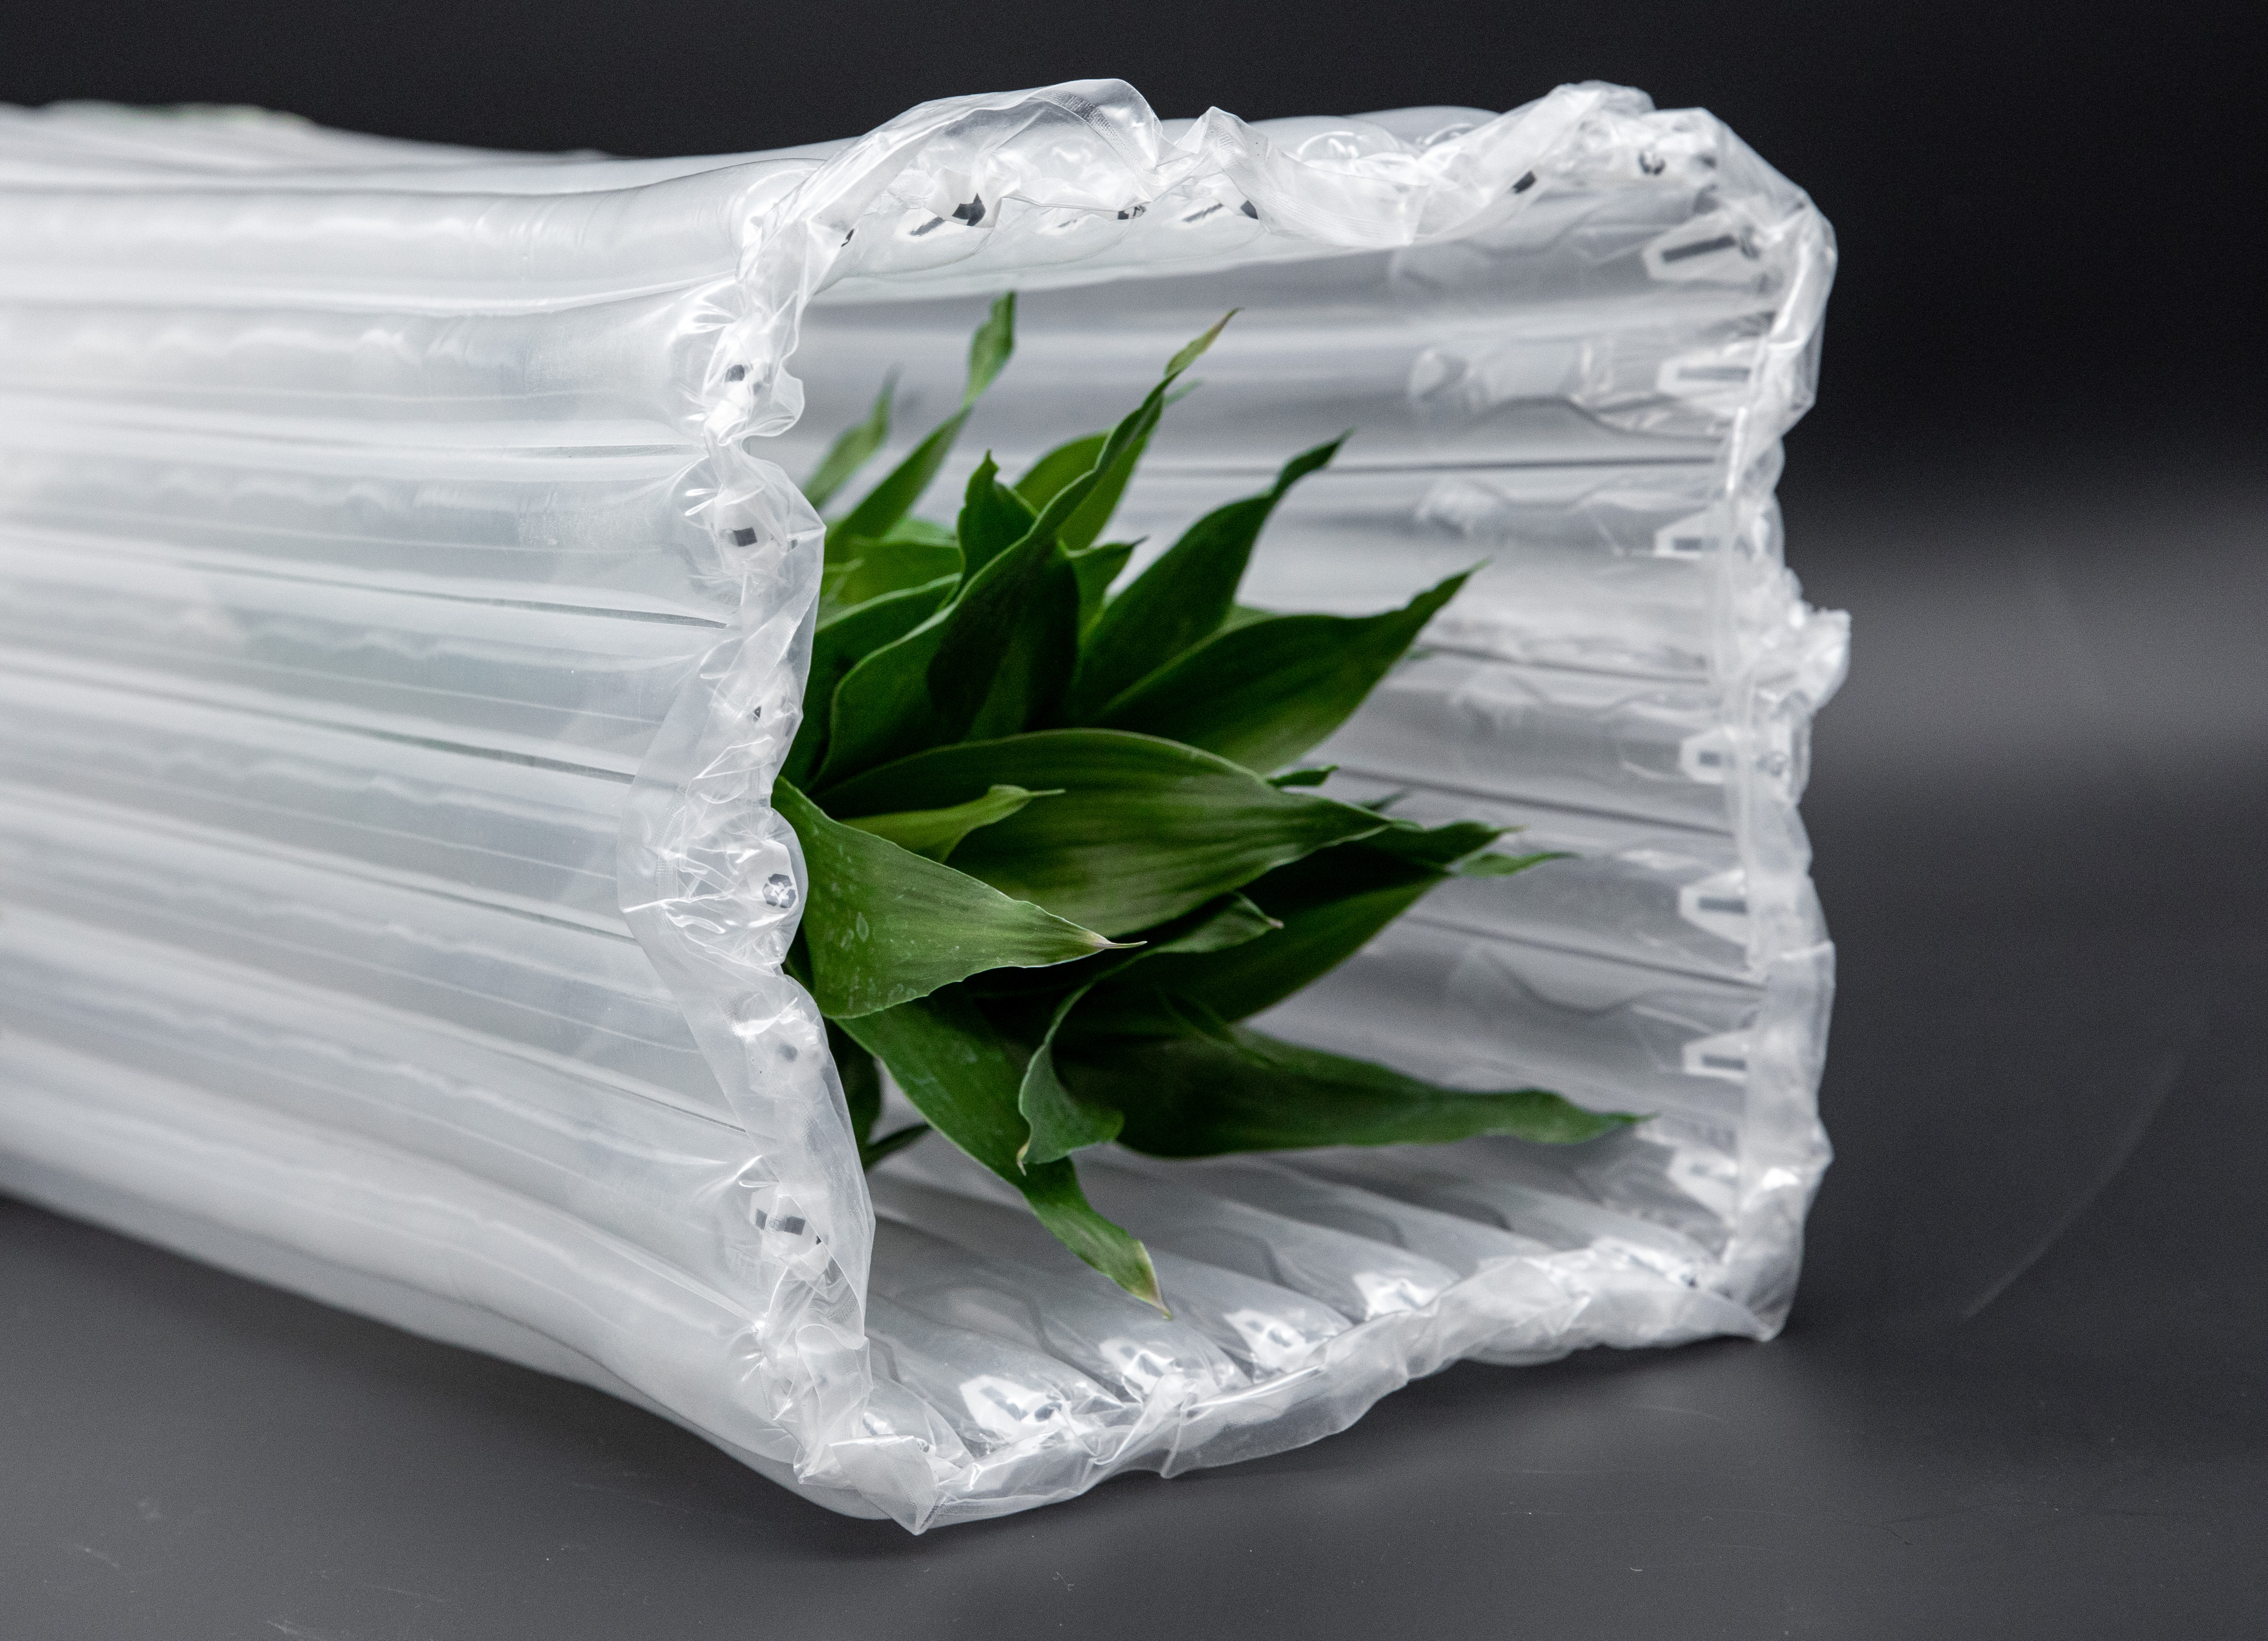 Ordinary Protective Packaging Air Column Bag For Goods